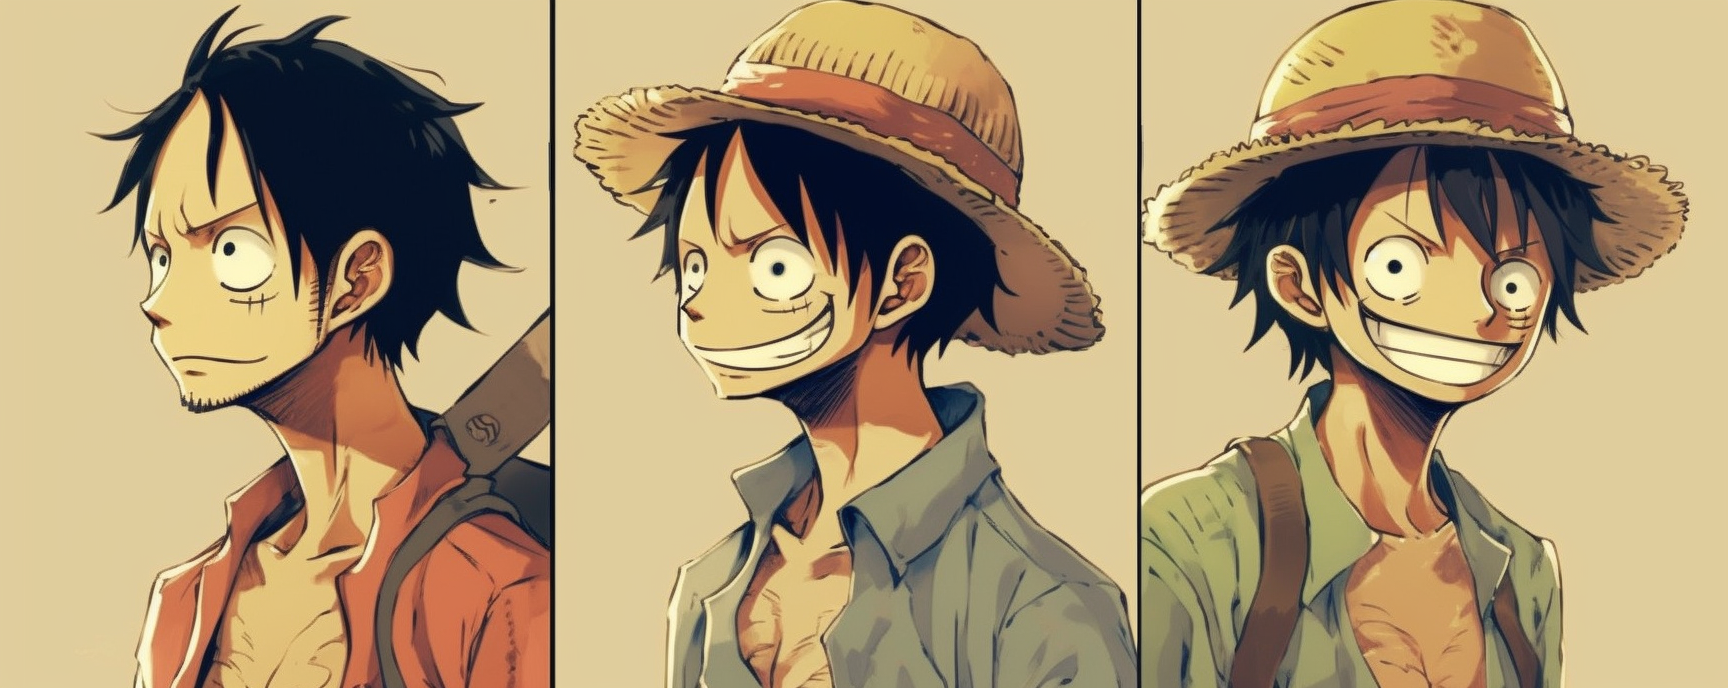 Overview and History of One Piece Anime Series